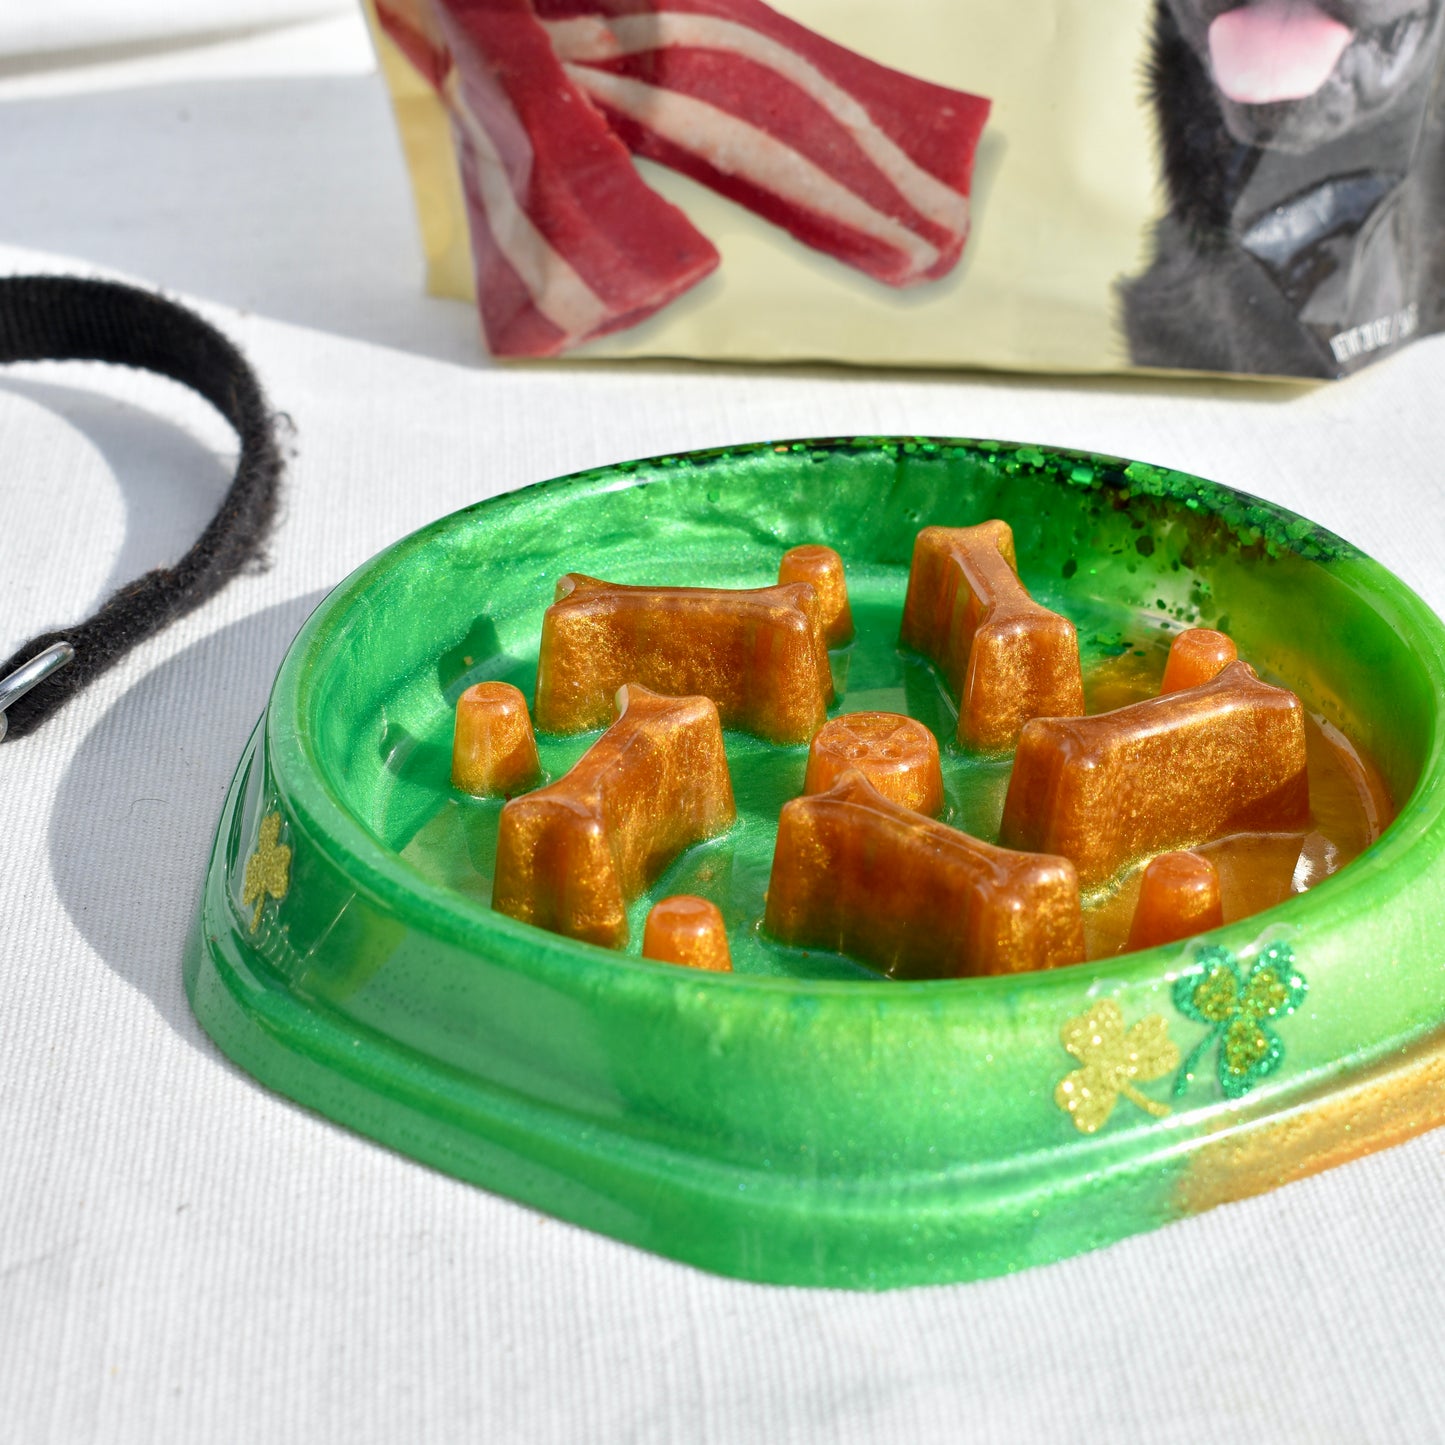 St. Patrick’s Day Personalized SLOW FEEDER Dog Bowl – Shamrock Personalized Pet Bowl - Pet Bowl with Name